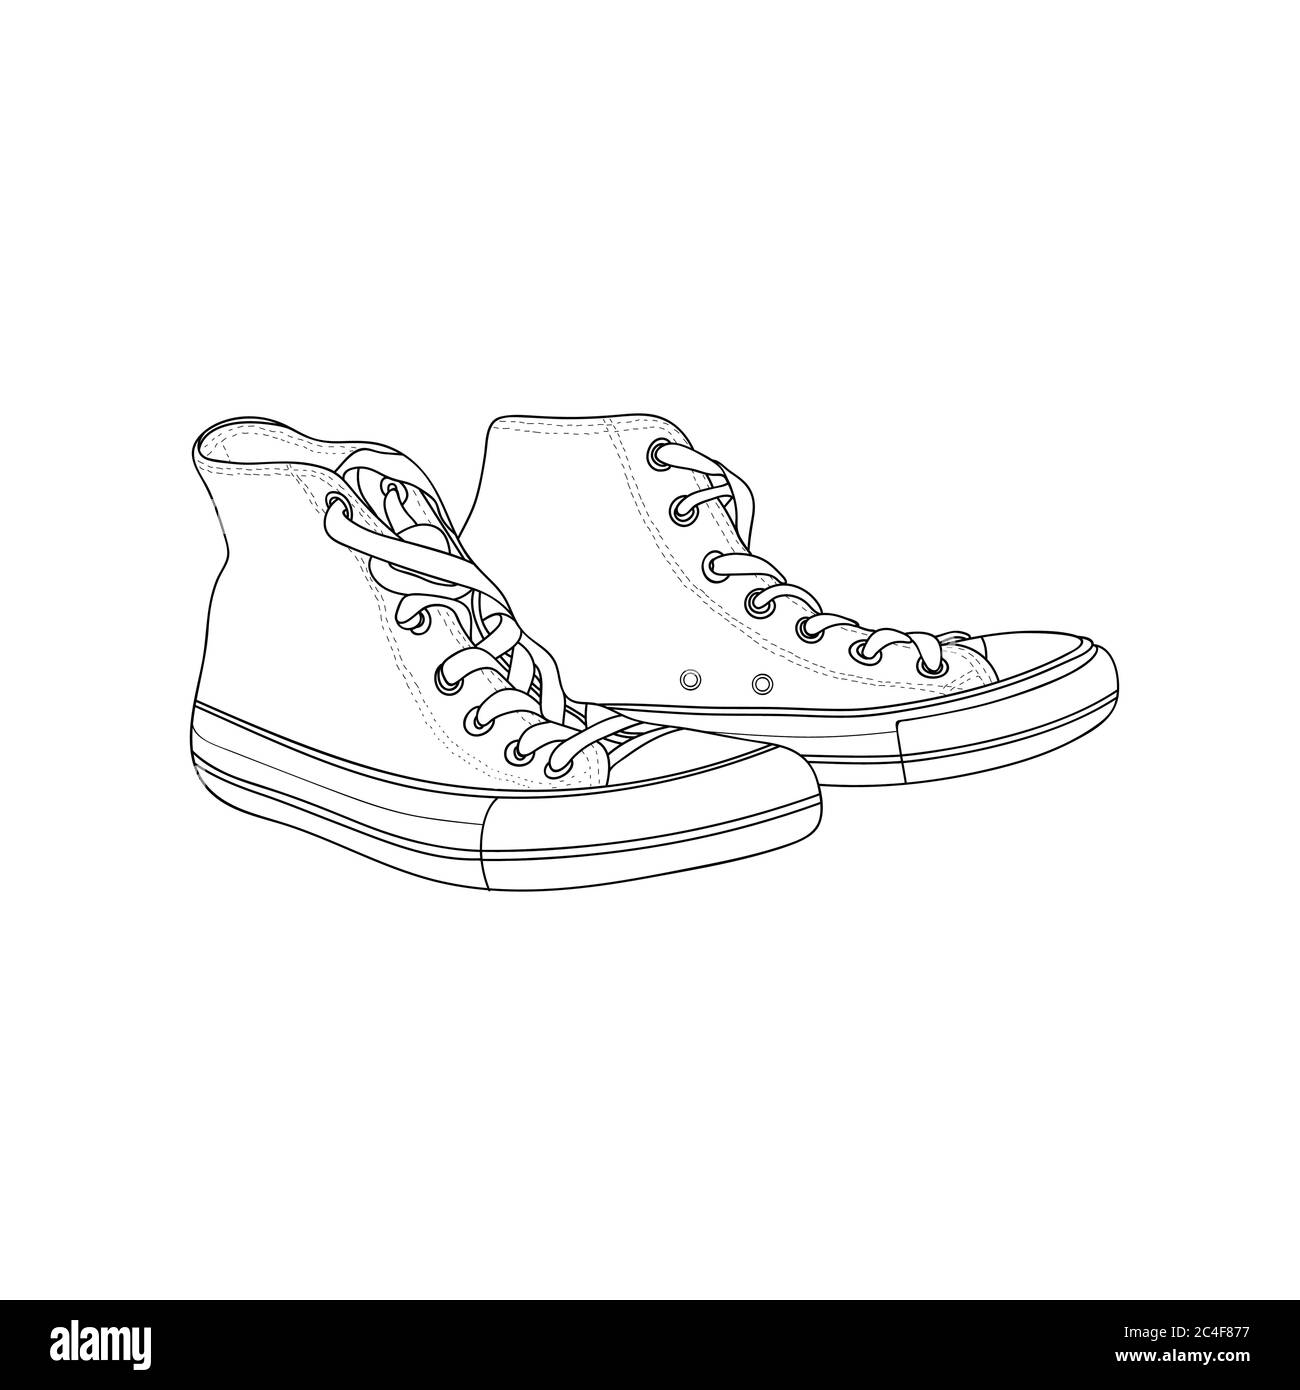 Footwear Brand Black and White Stock Photos & Images - Alamy